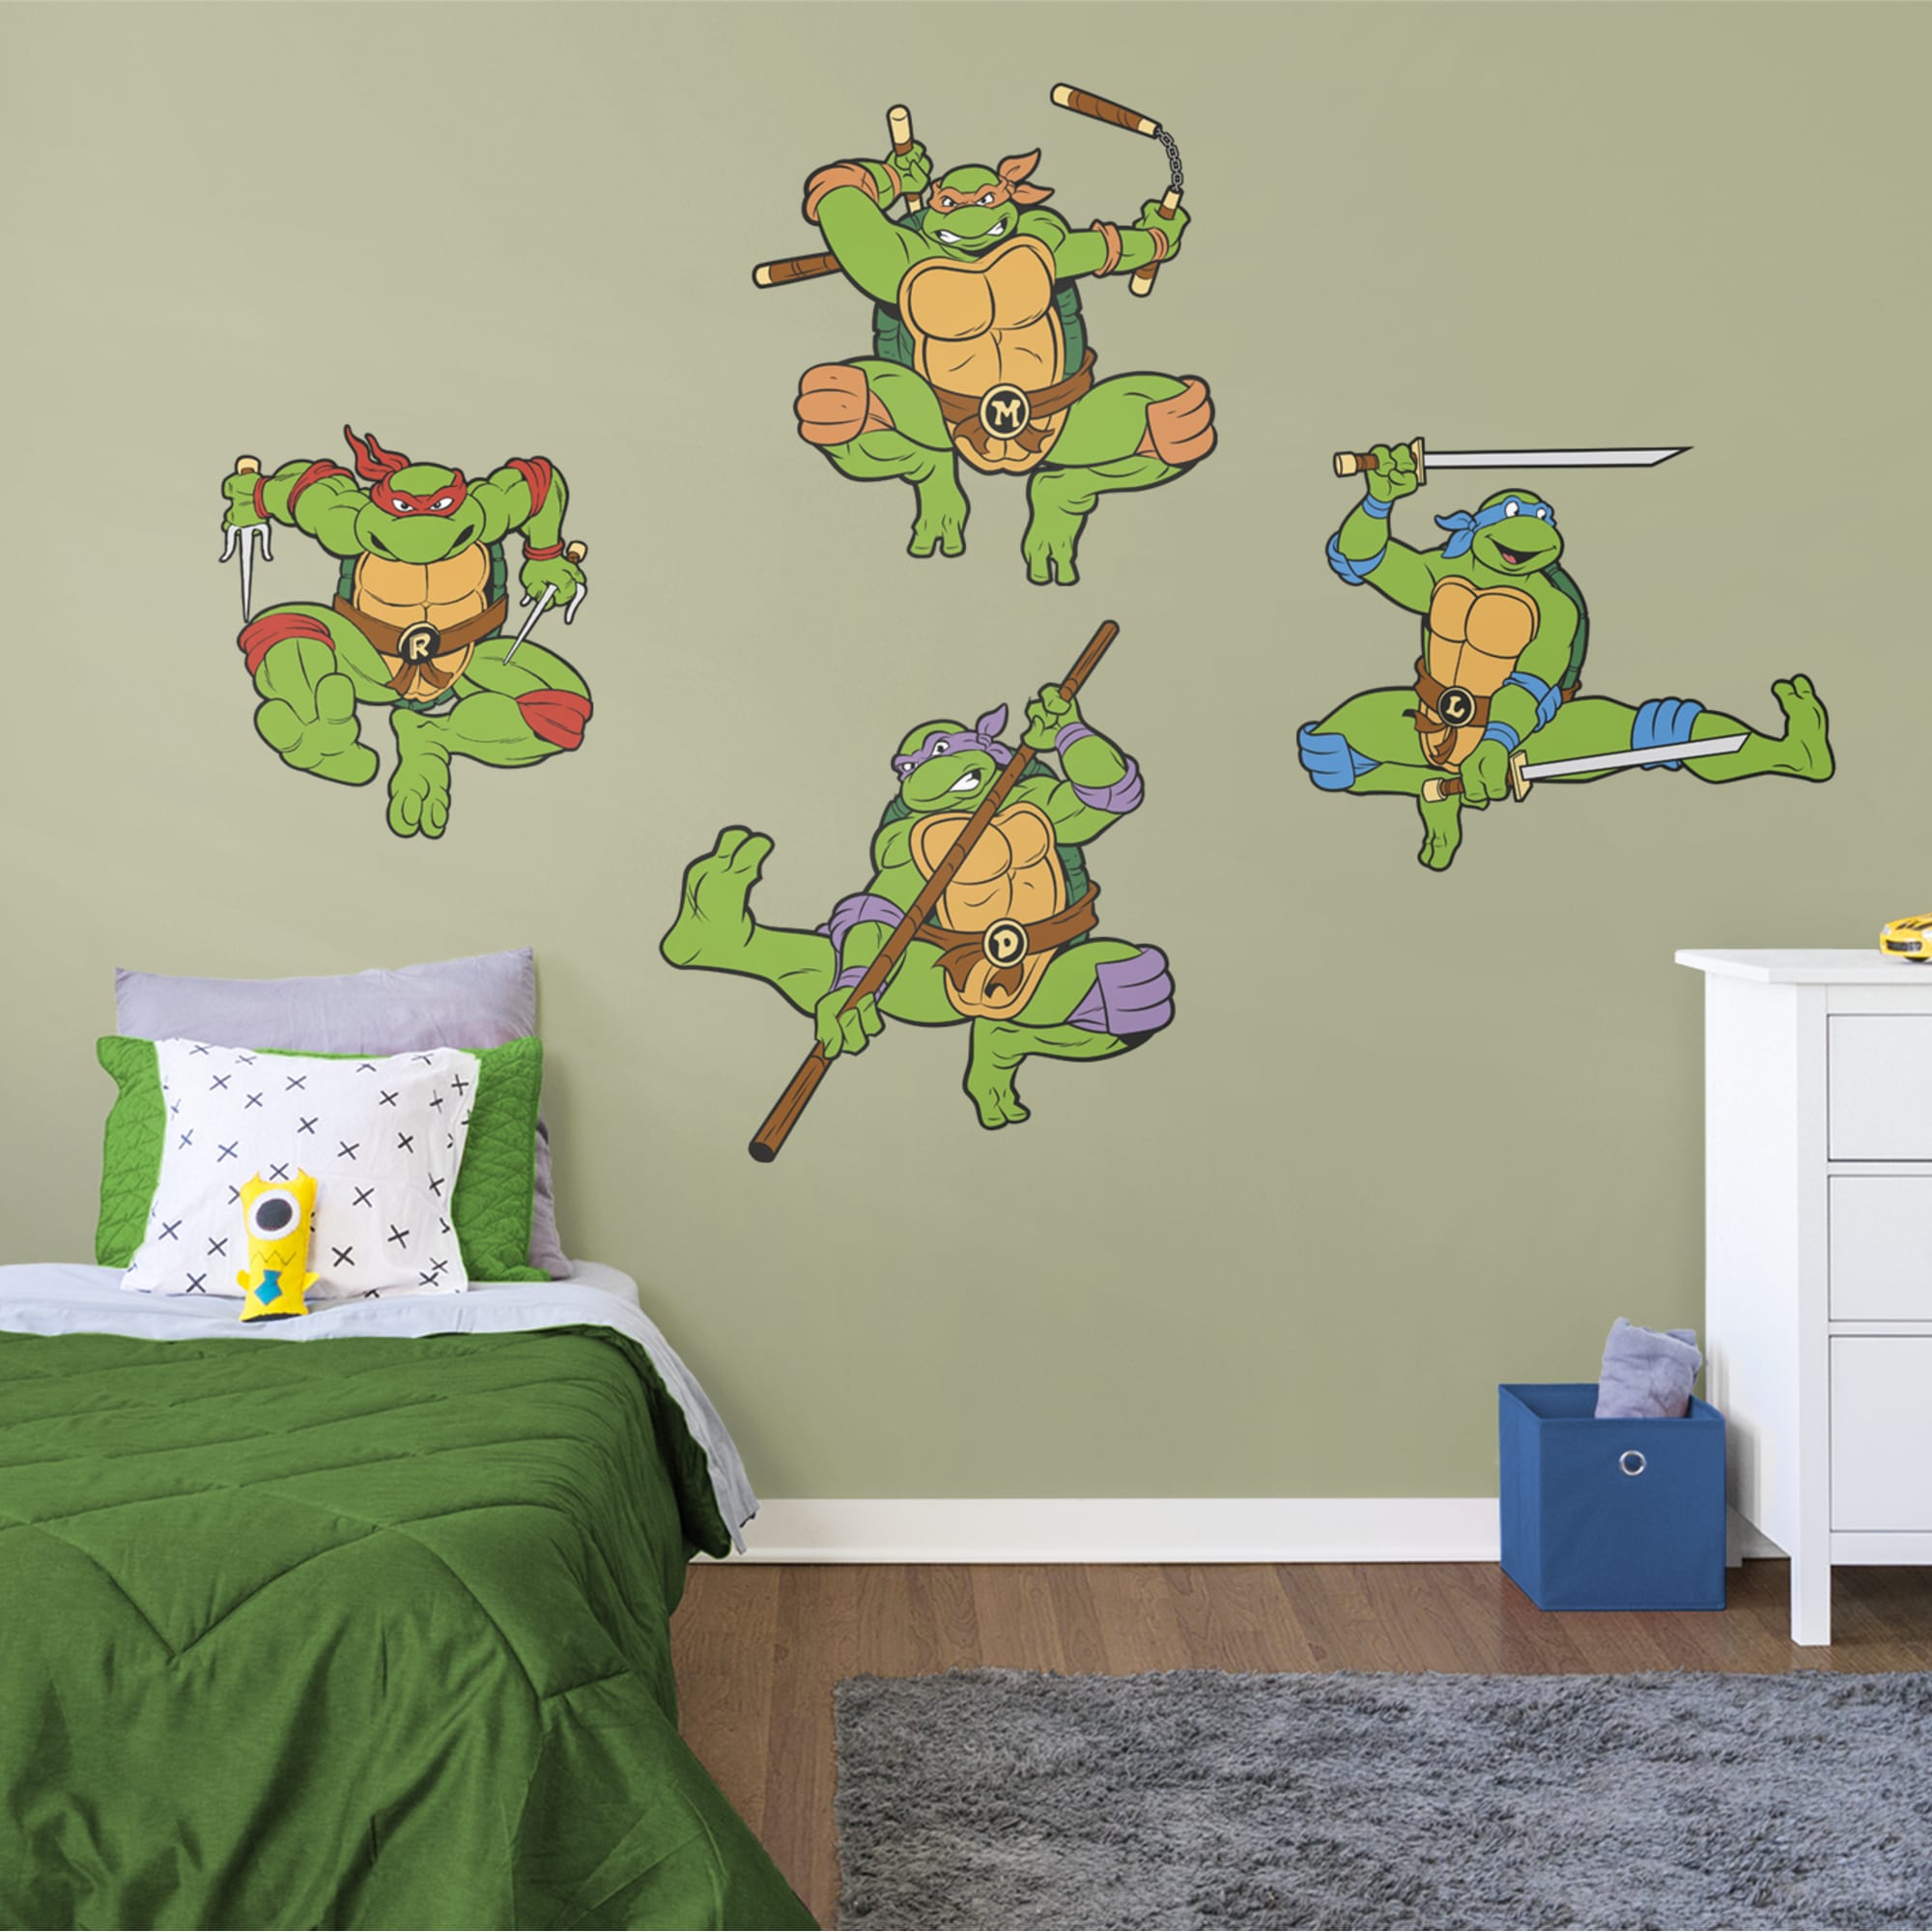 Teenage Mutant Ninja Turtles: Classic Collection - Officially Licensed Removable Wall Decal 79.0"W x 52.0"H by Fathead | Vinyl